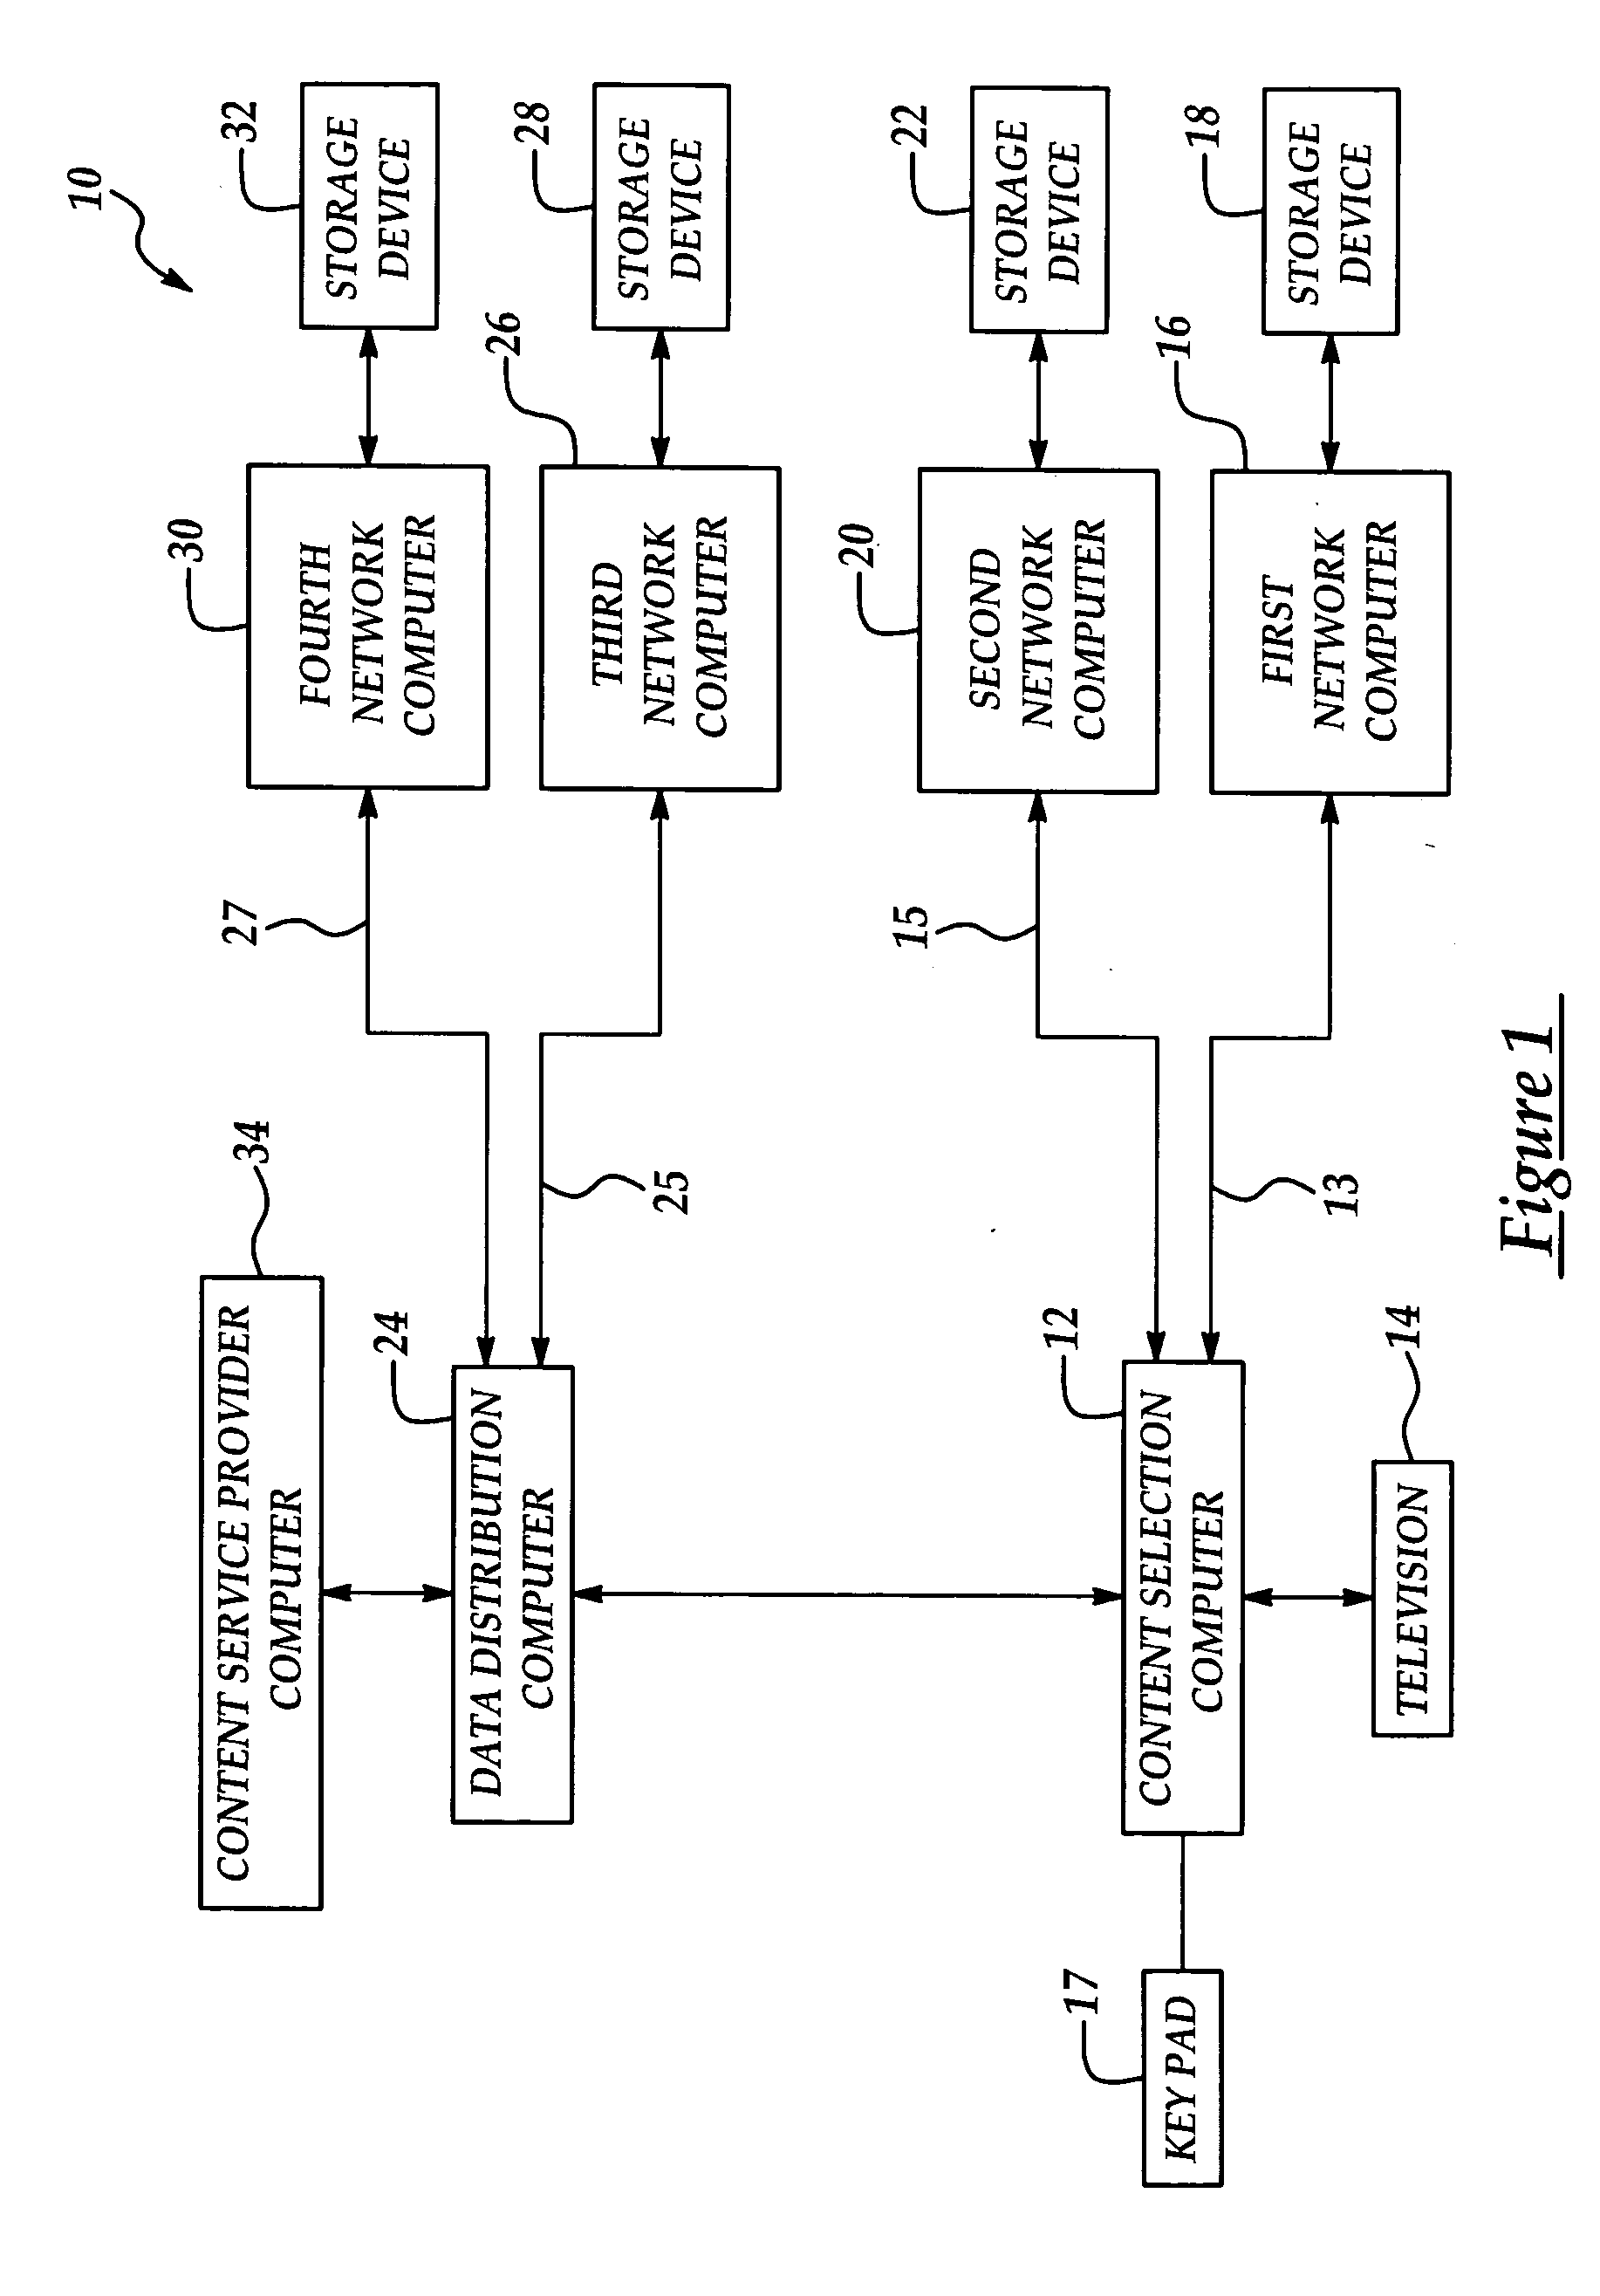 Systems, methods, and a storage medium for storing and securely transmitting digital media data